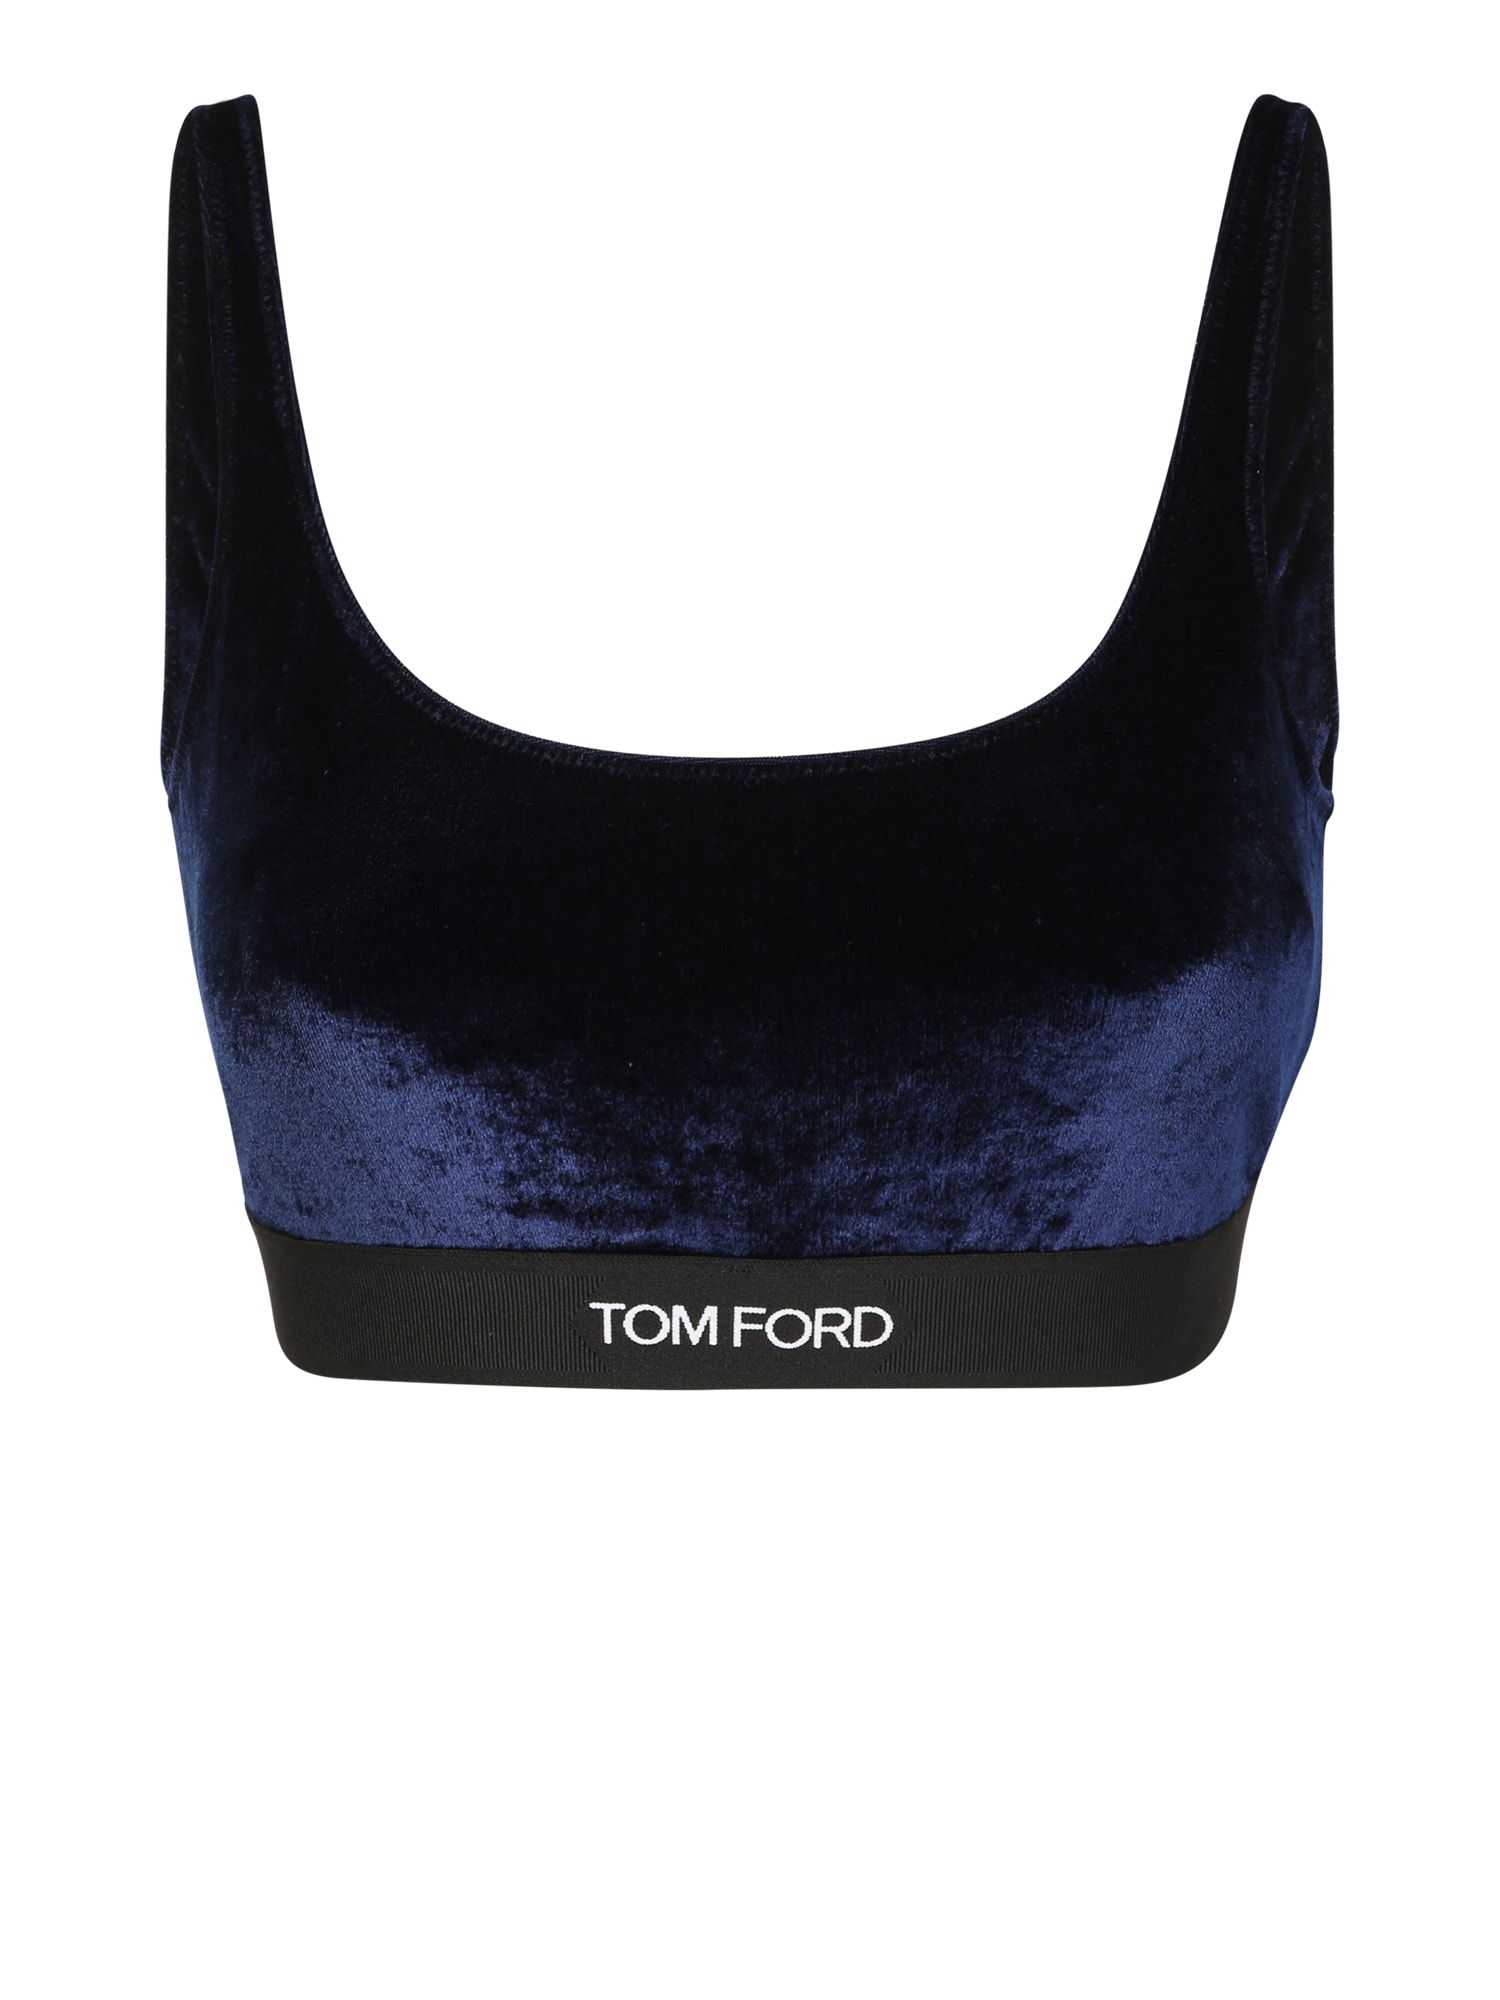 TOM FORD THIS TOM FORD VELVET BRALETTE IS THE PERFECT COMBINATION OF SPORTSWEAR AND EVENING WEAR